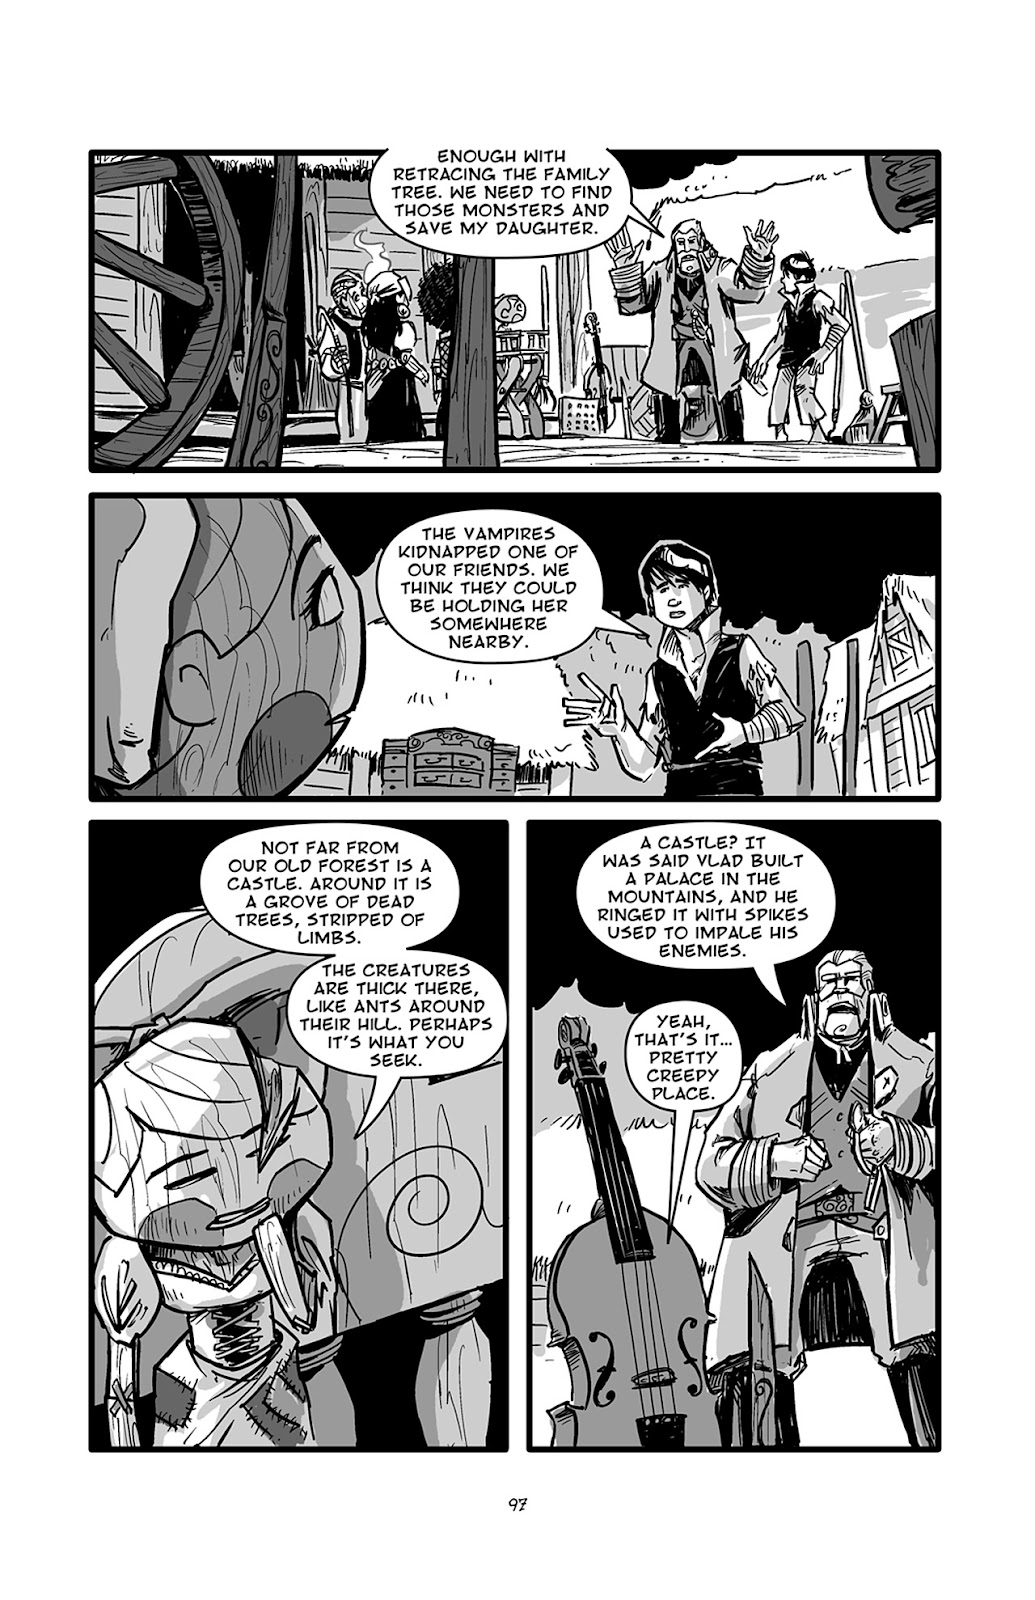 Pinocchio: Vampire Slayer - Of Wood and Blood issue 4 - Page 24